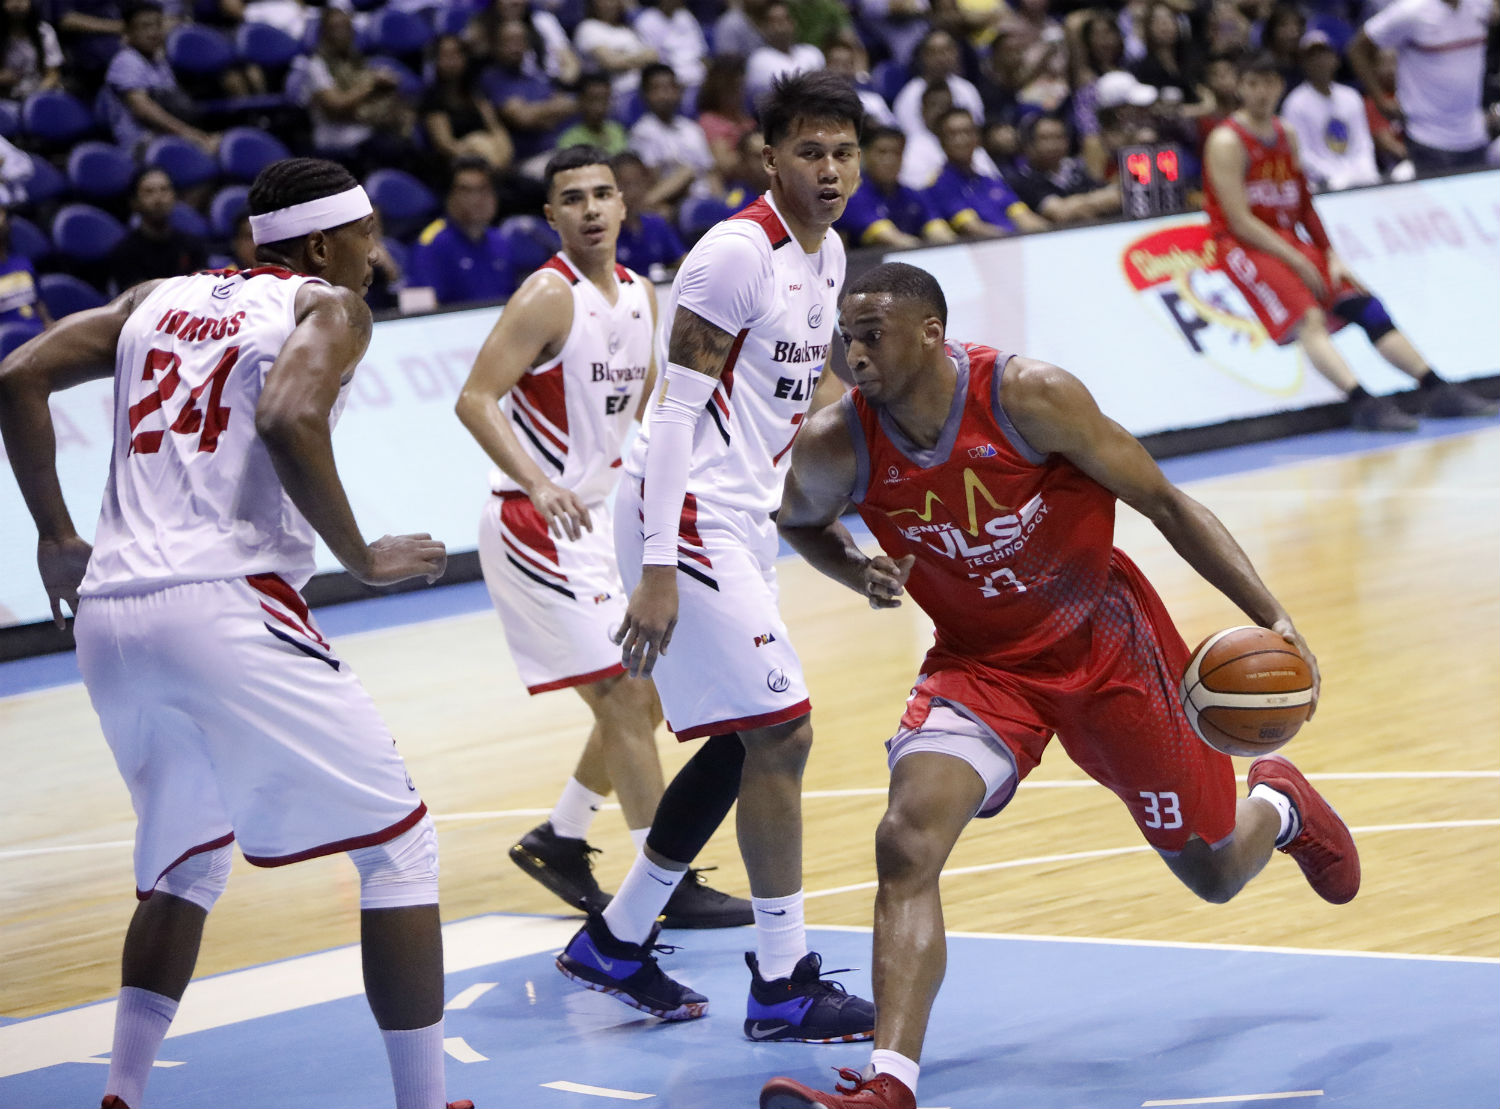 NO STOPPING. James White (33) shrugs off cramps on the way to finishing with 31 points, 14 rebounds, 5 assists, 5 blocks and two steals in the Phoenix Fuel Masters' 107-102 win over the Blackwater Elite. Photo by PBA Images 